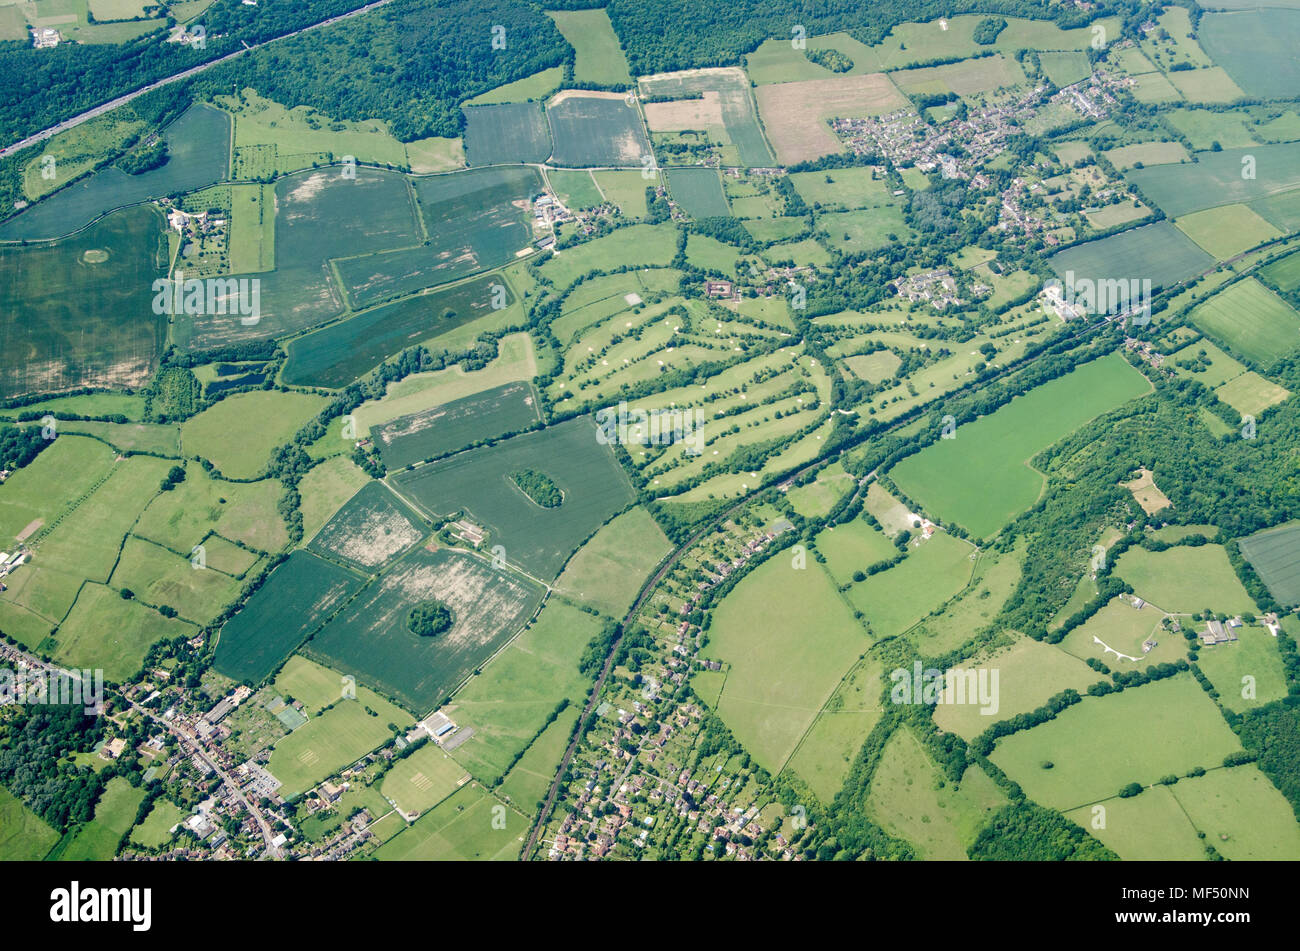 Aerial view of the Kent villages of Otford and Shoreham with the Darenth Valley Country Club and golf course in between.  Viewed on a sunny summer day Stock Photo